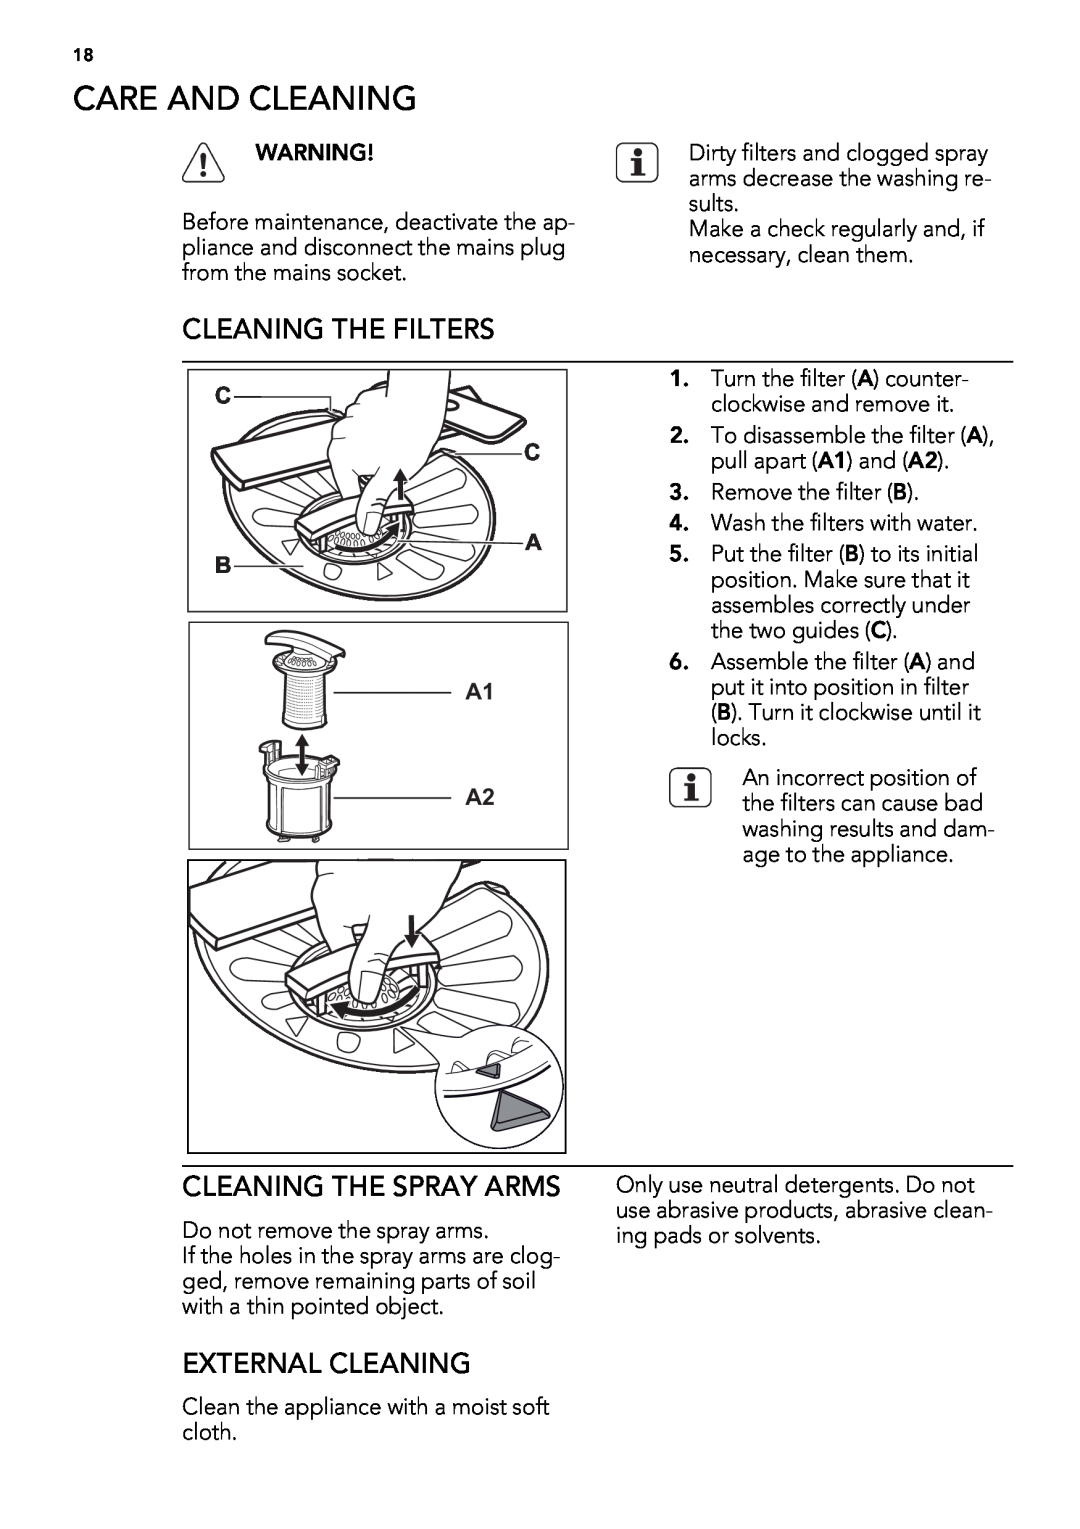 AEG 88060 user manual Care And Cleaning, Cleaning The Filters, Cleaning The Spray Arms, External Cleaning 